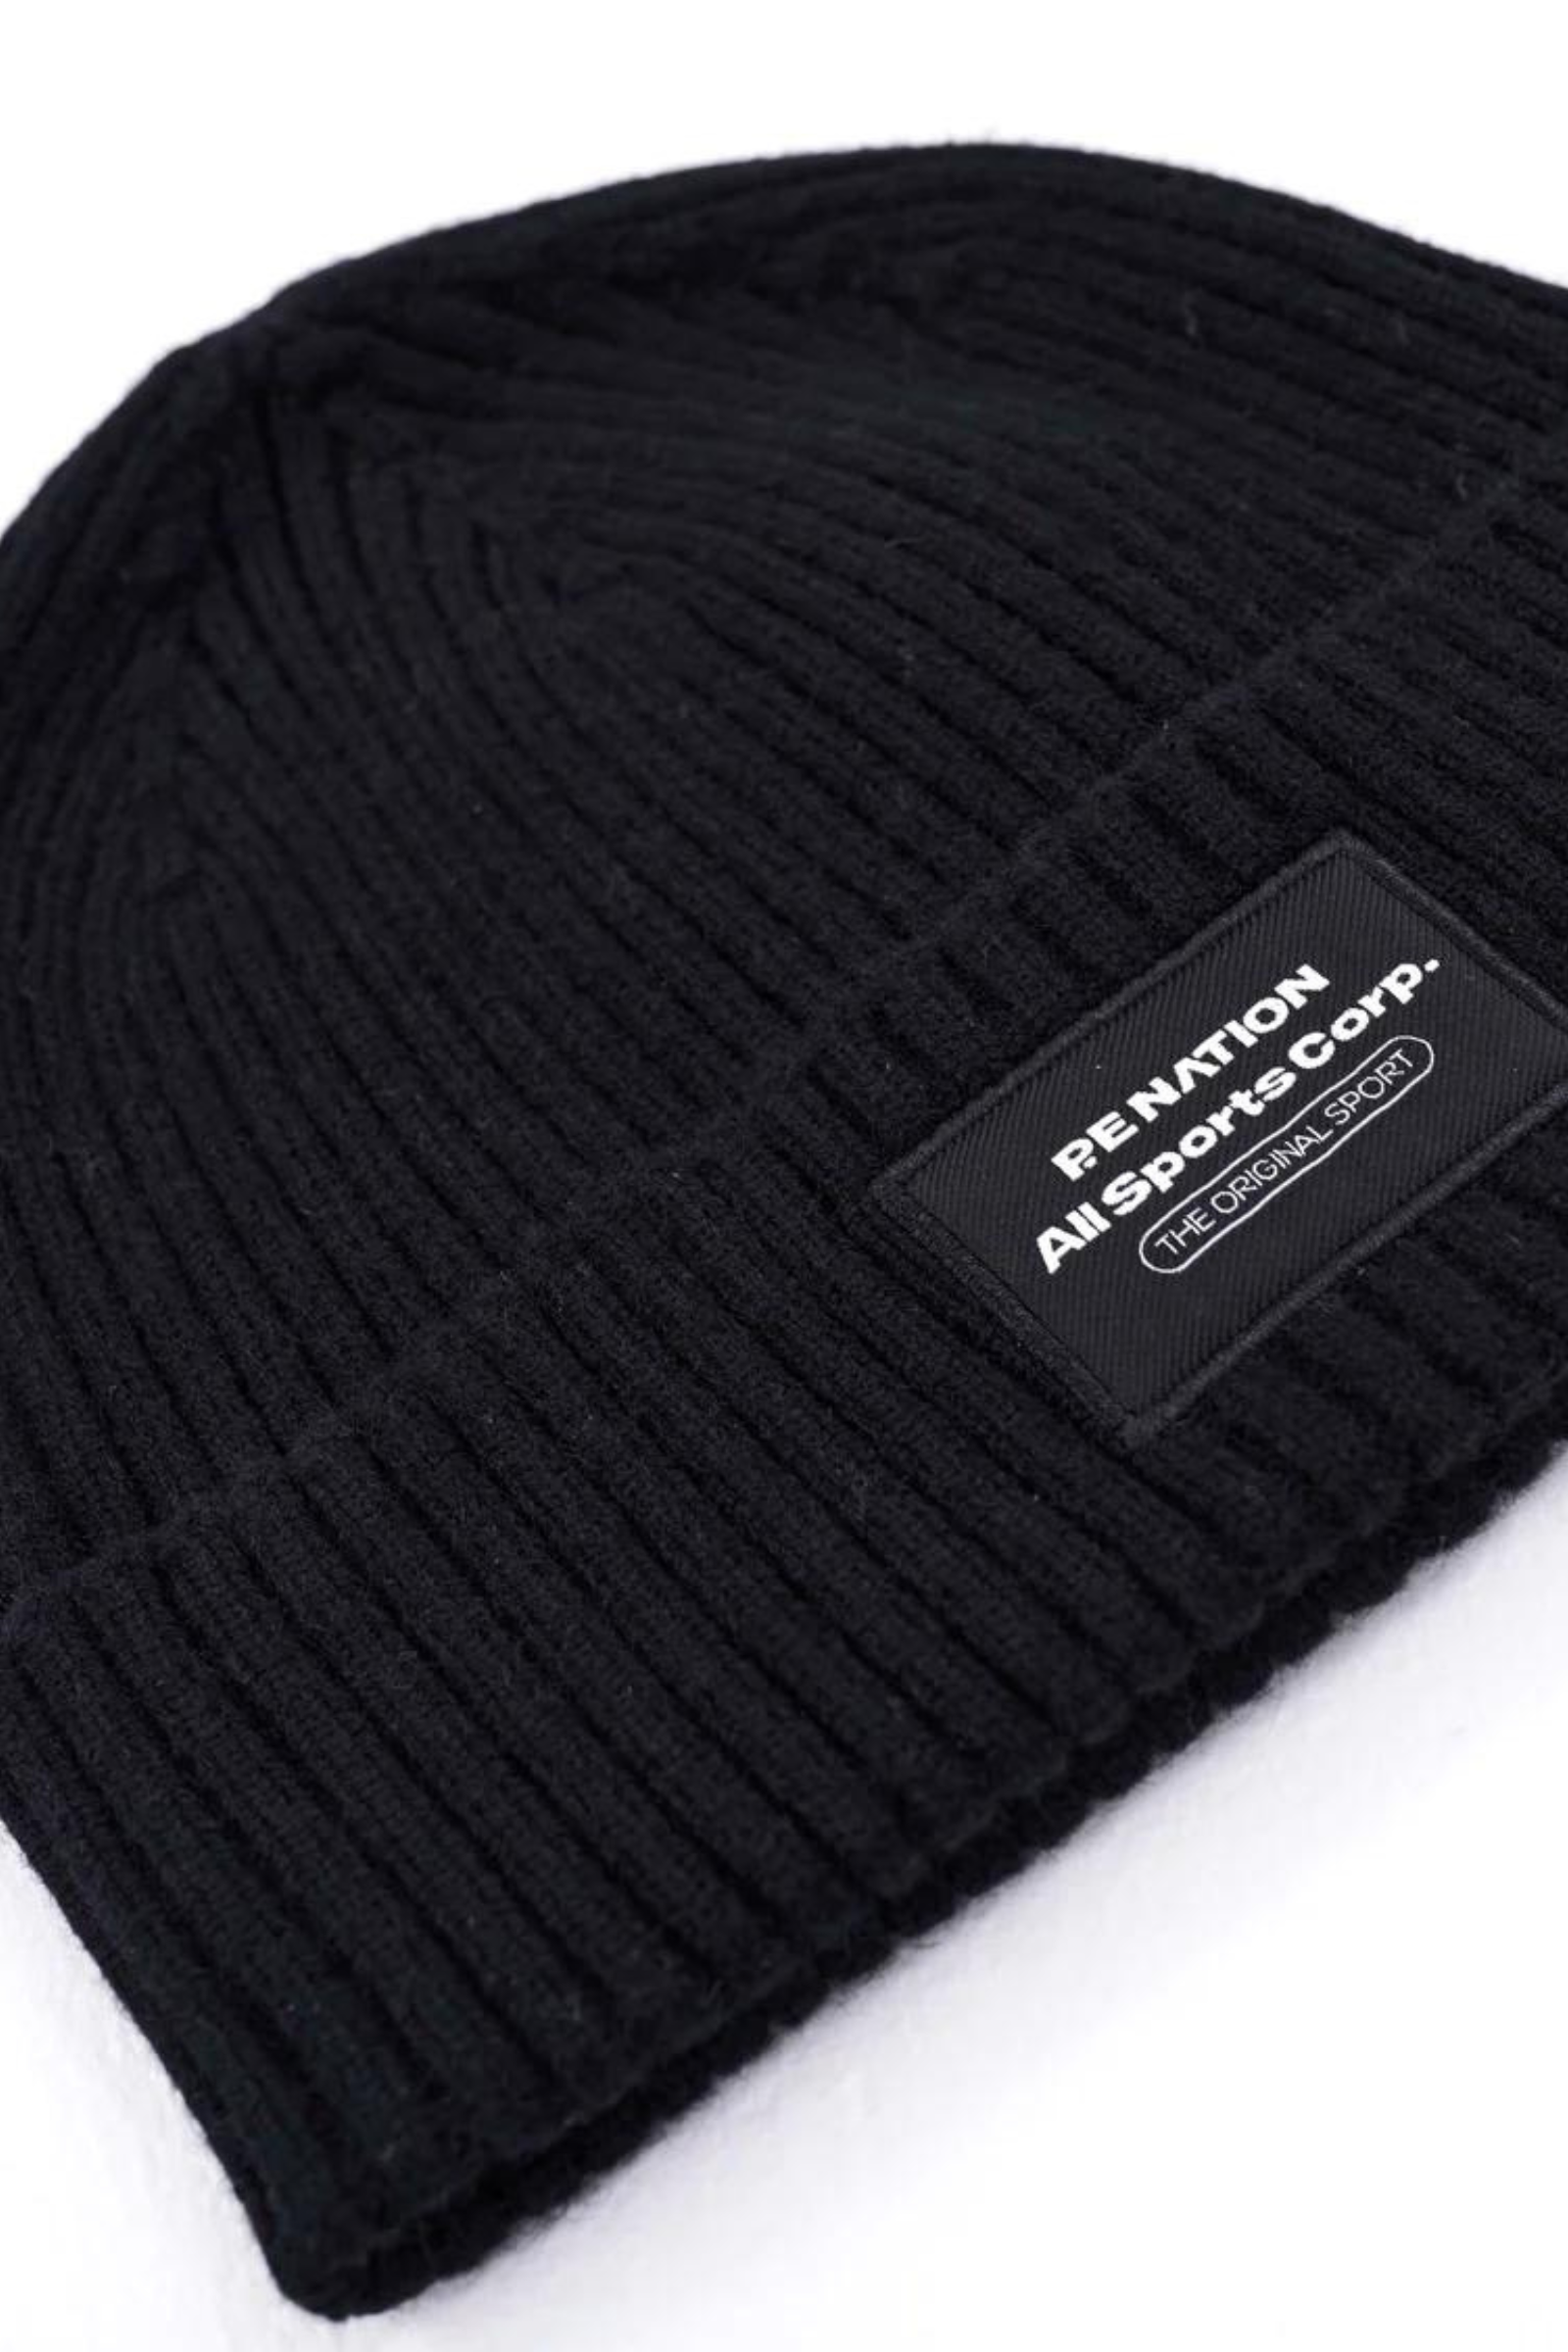 SOUTH SIDE KNIT BEANIE IN BLACK